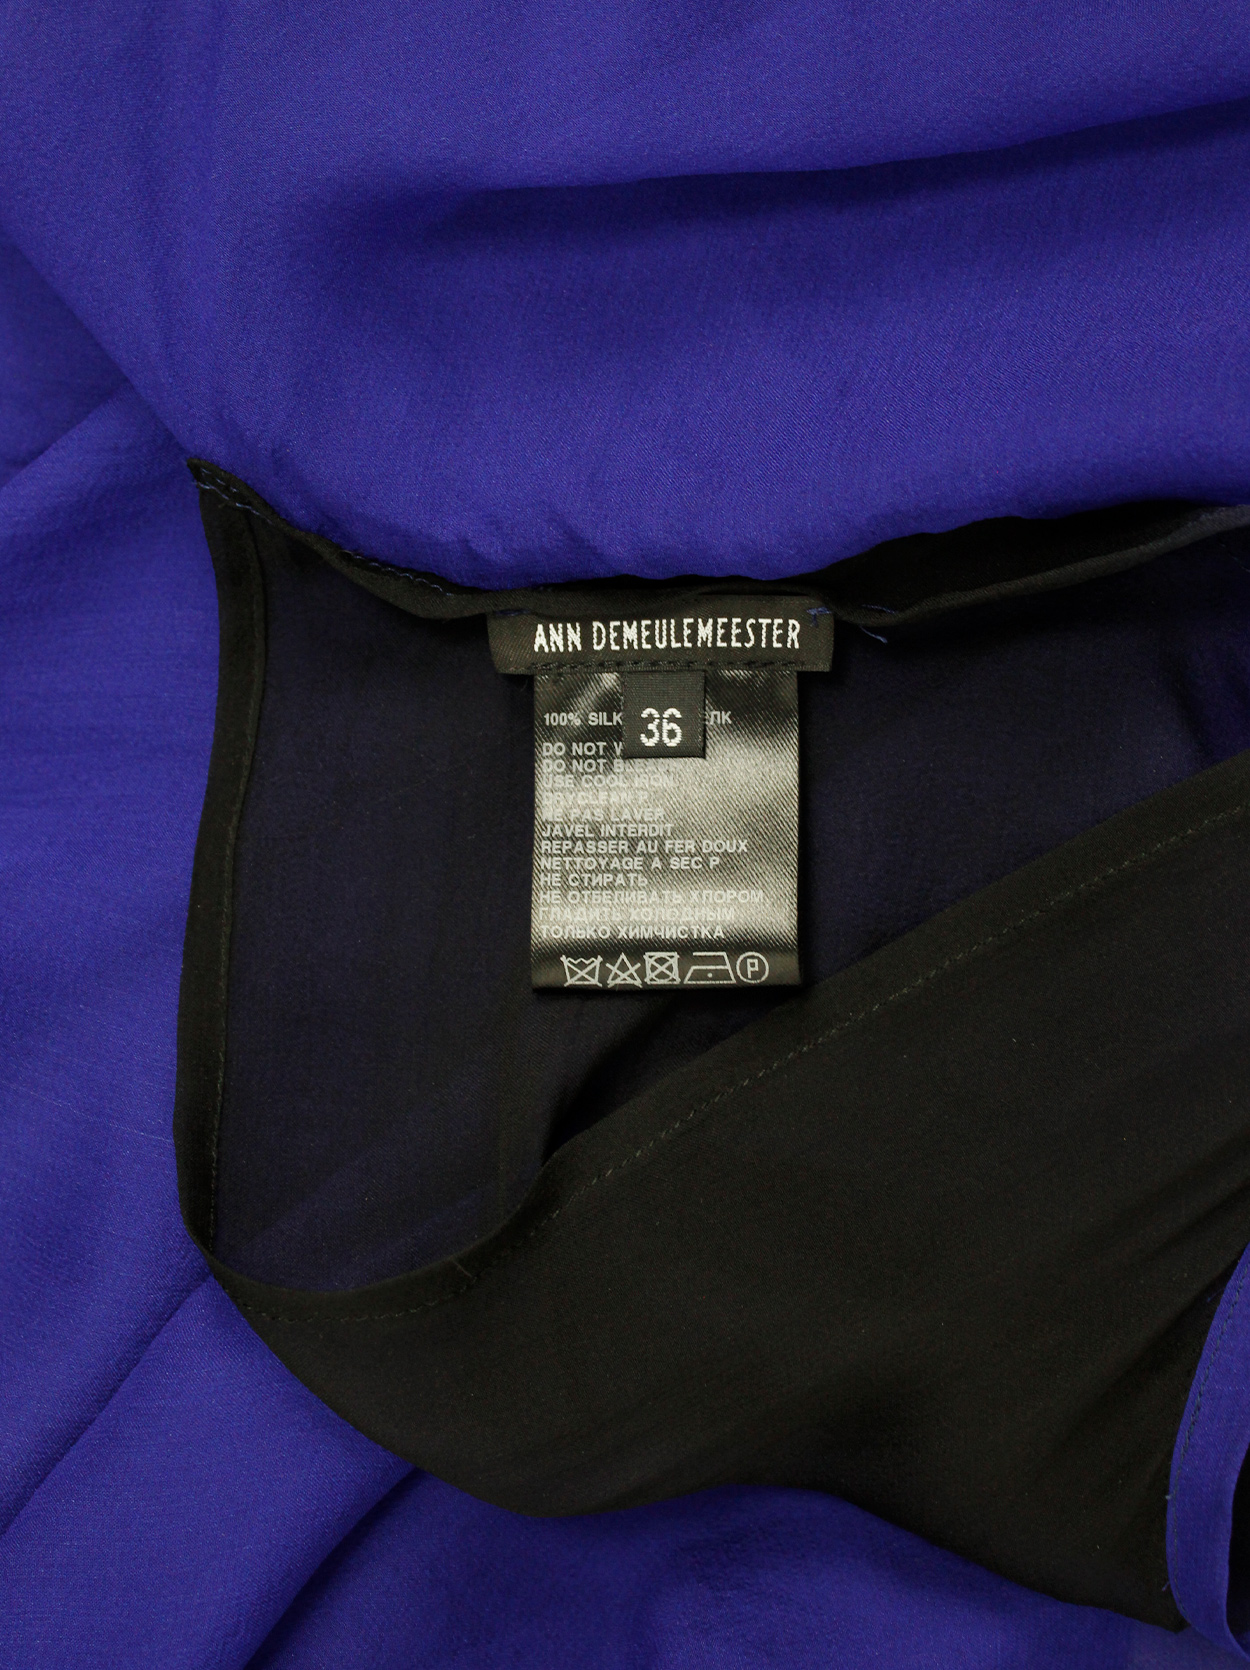 Ann Demeulemeester blue and black ombre sheer top with back drape ...